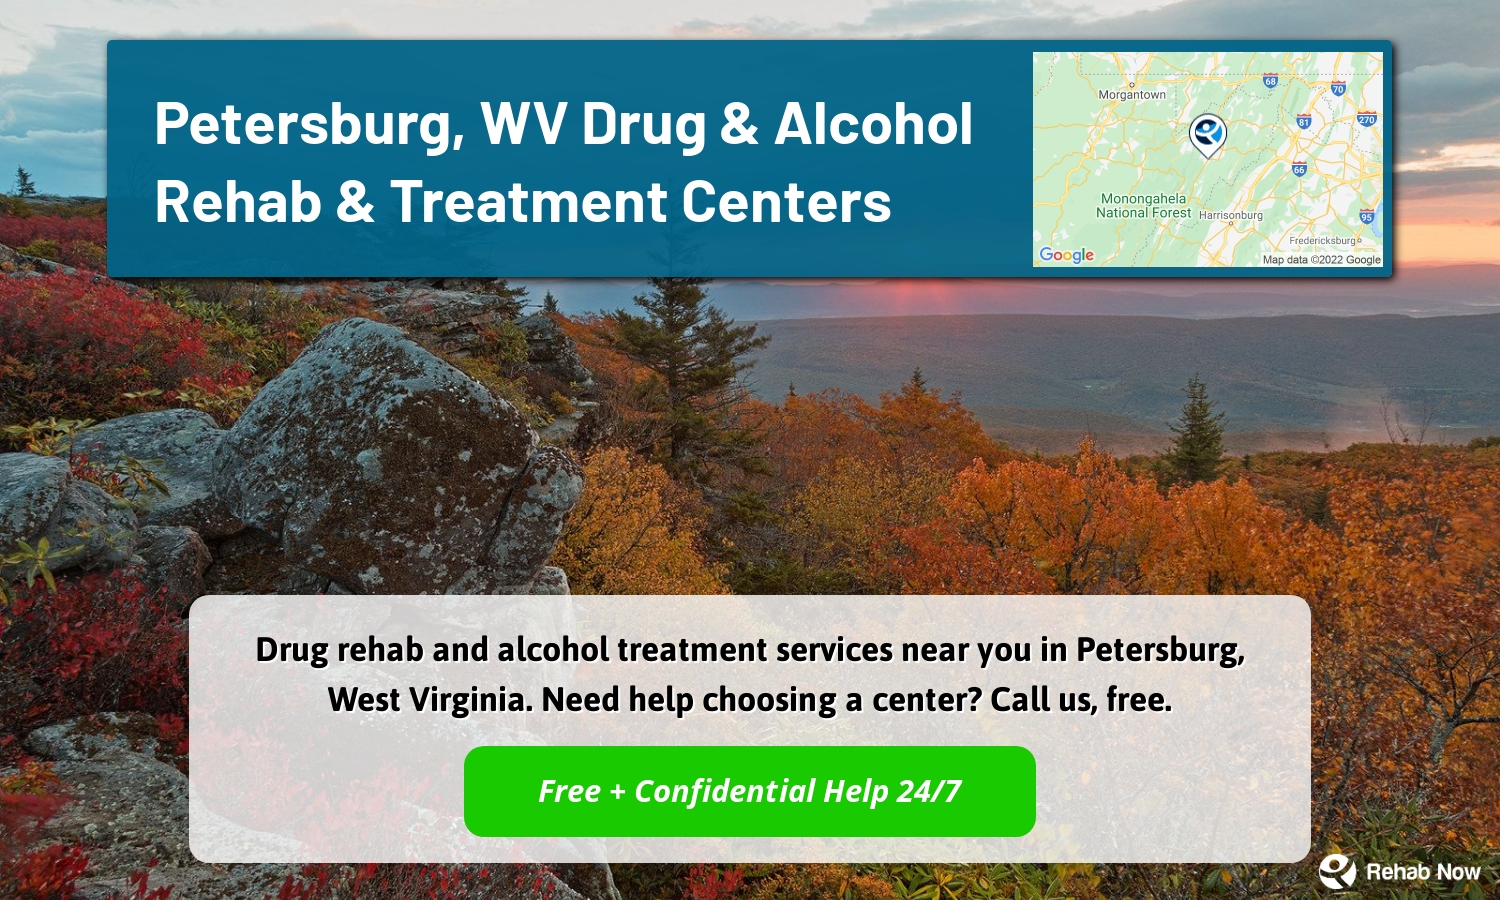 Drug rehab and alcohol treatment services near you in Petersburg, West Virginia. Need help choosing a center? Call us, free.